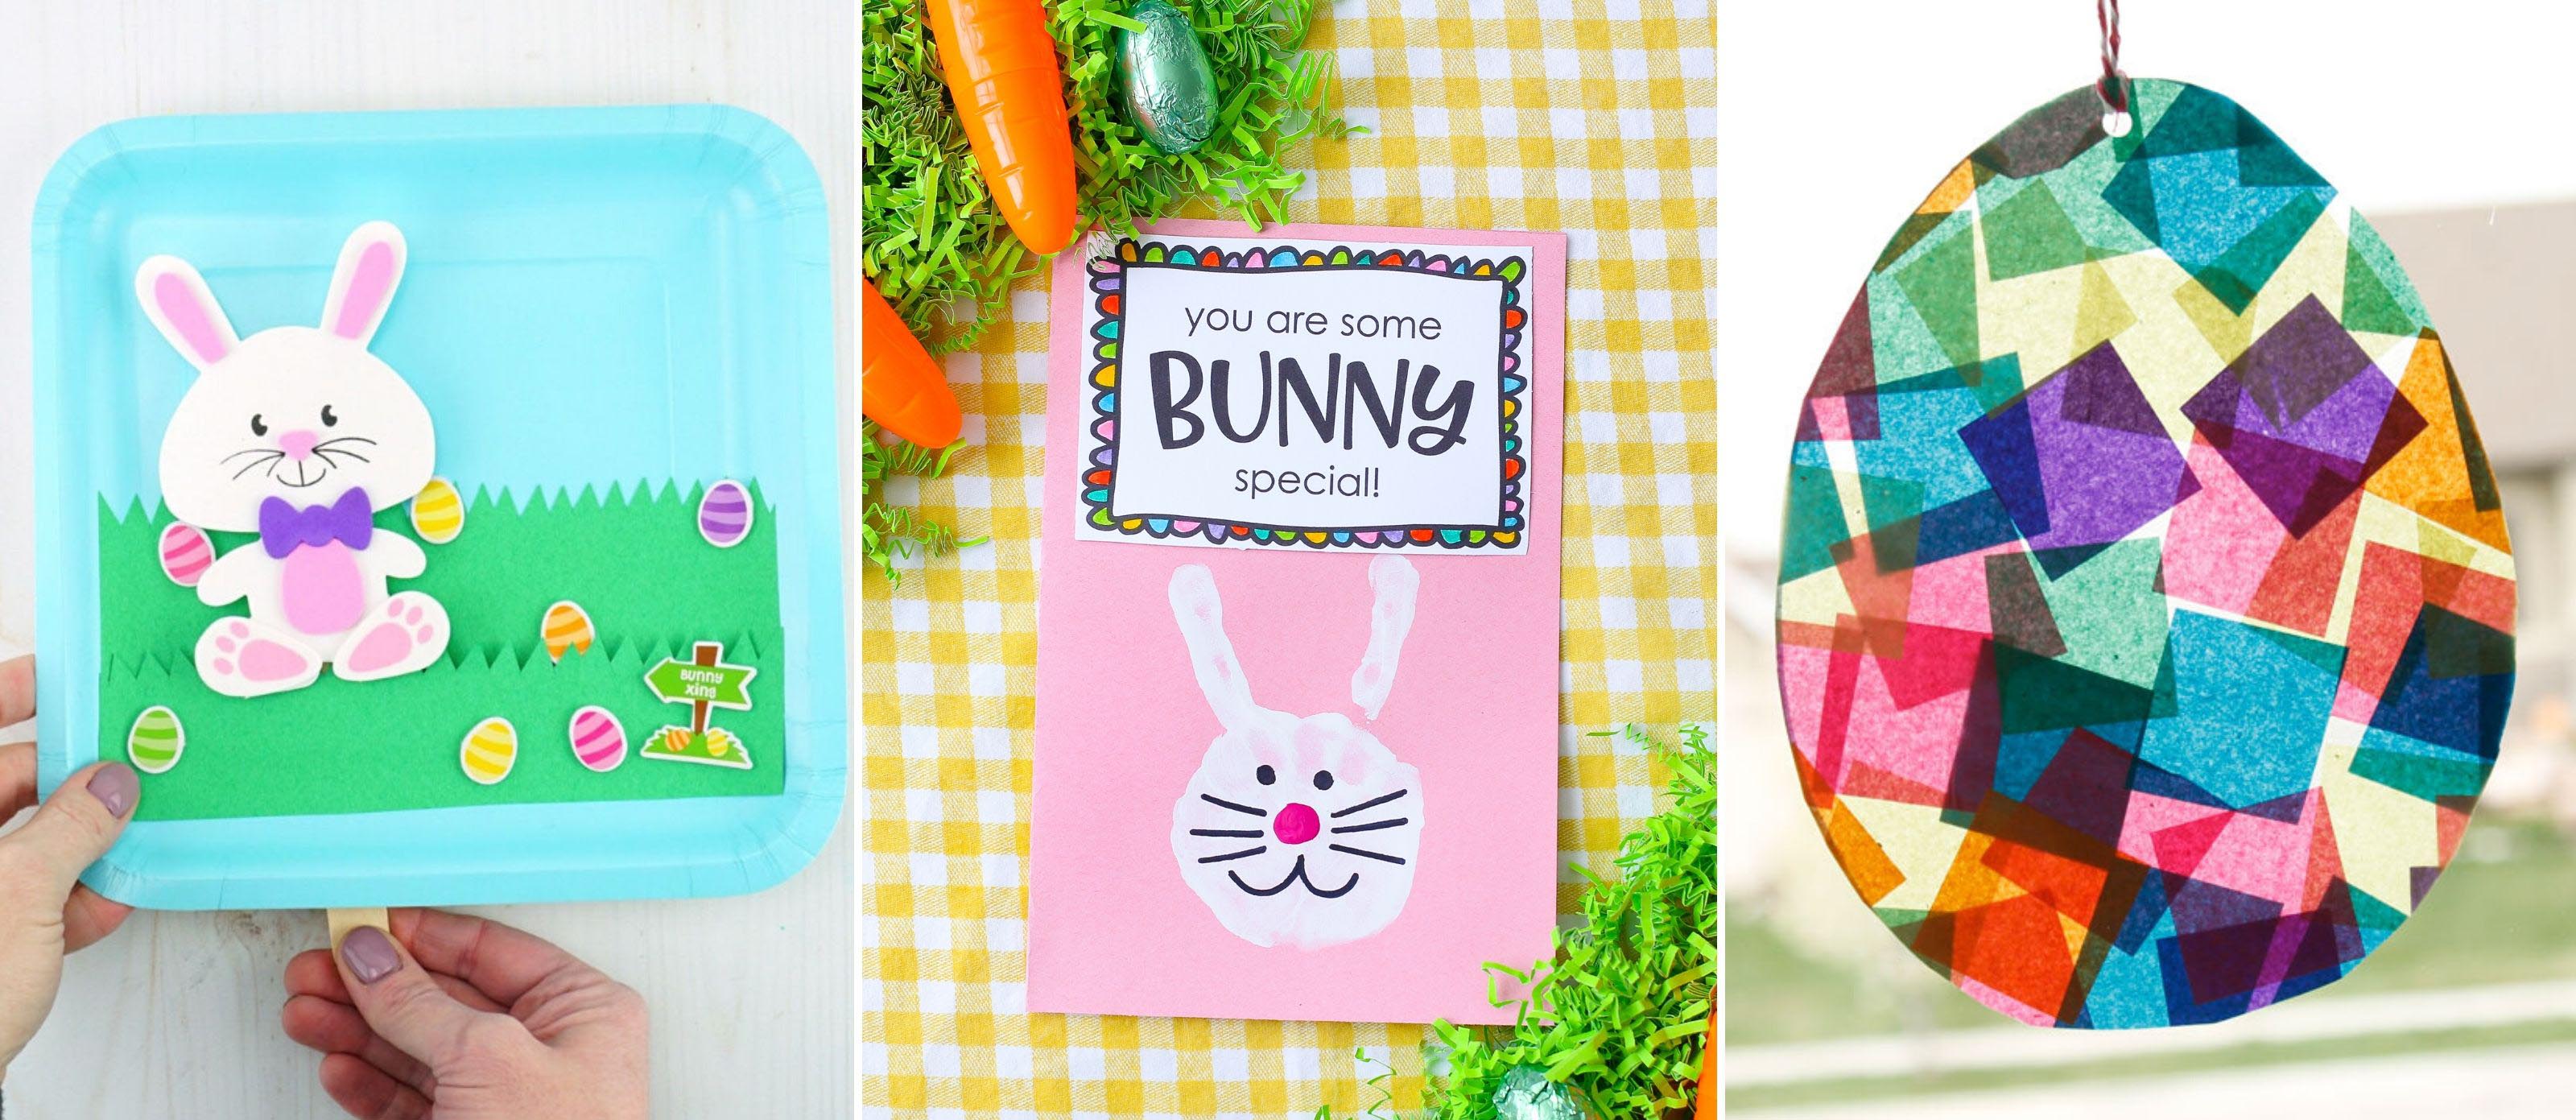 Easter Decorations Spring Decorations Small Single Color Bunny- Inspired Classroom/School Crafts Projects Kids Crafts Projects. Die-Cut Magnetic 